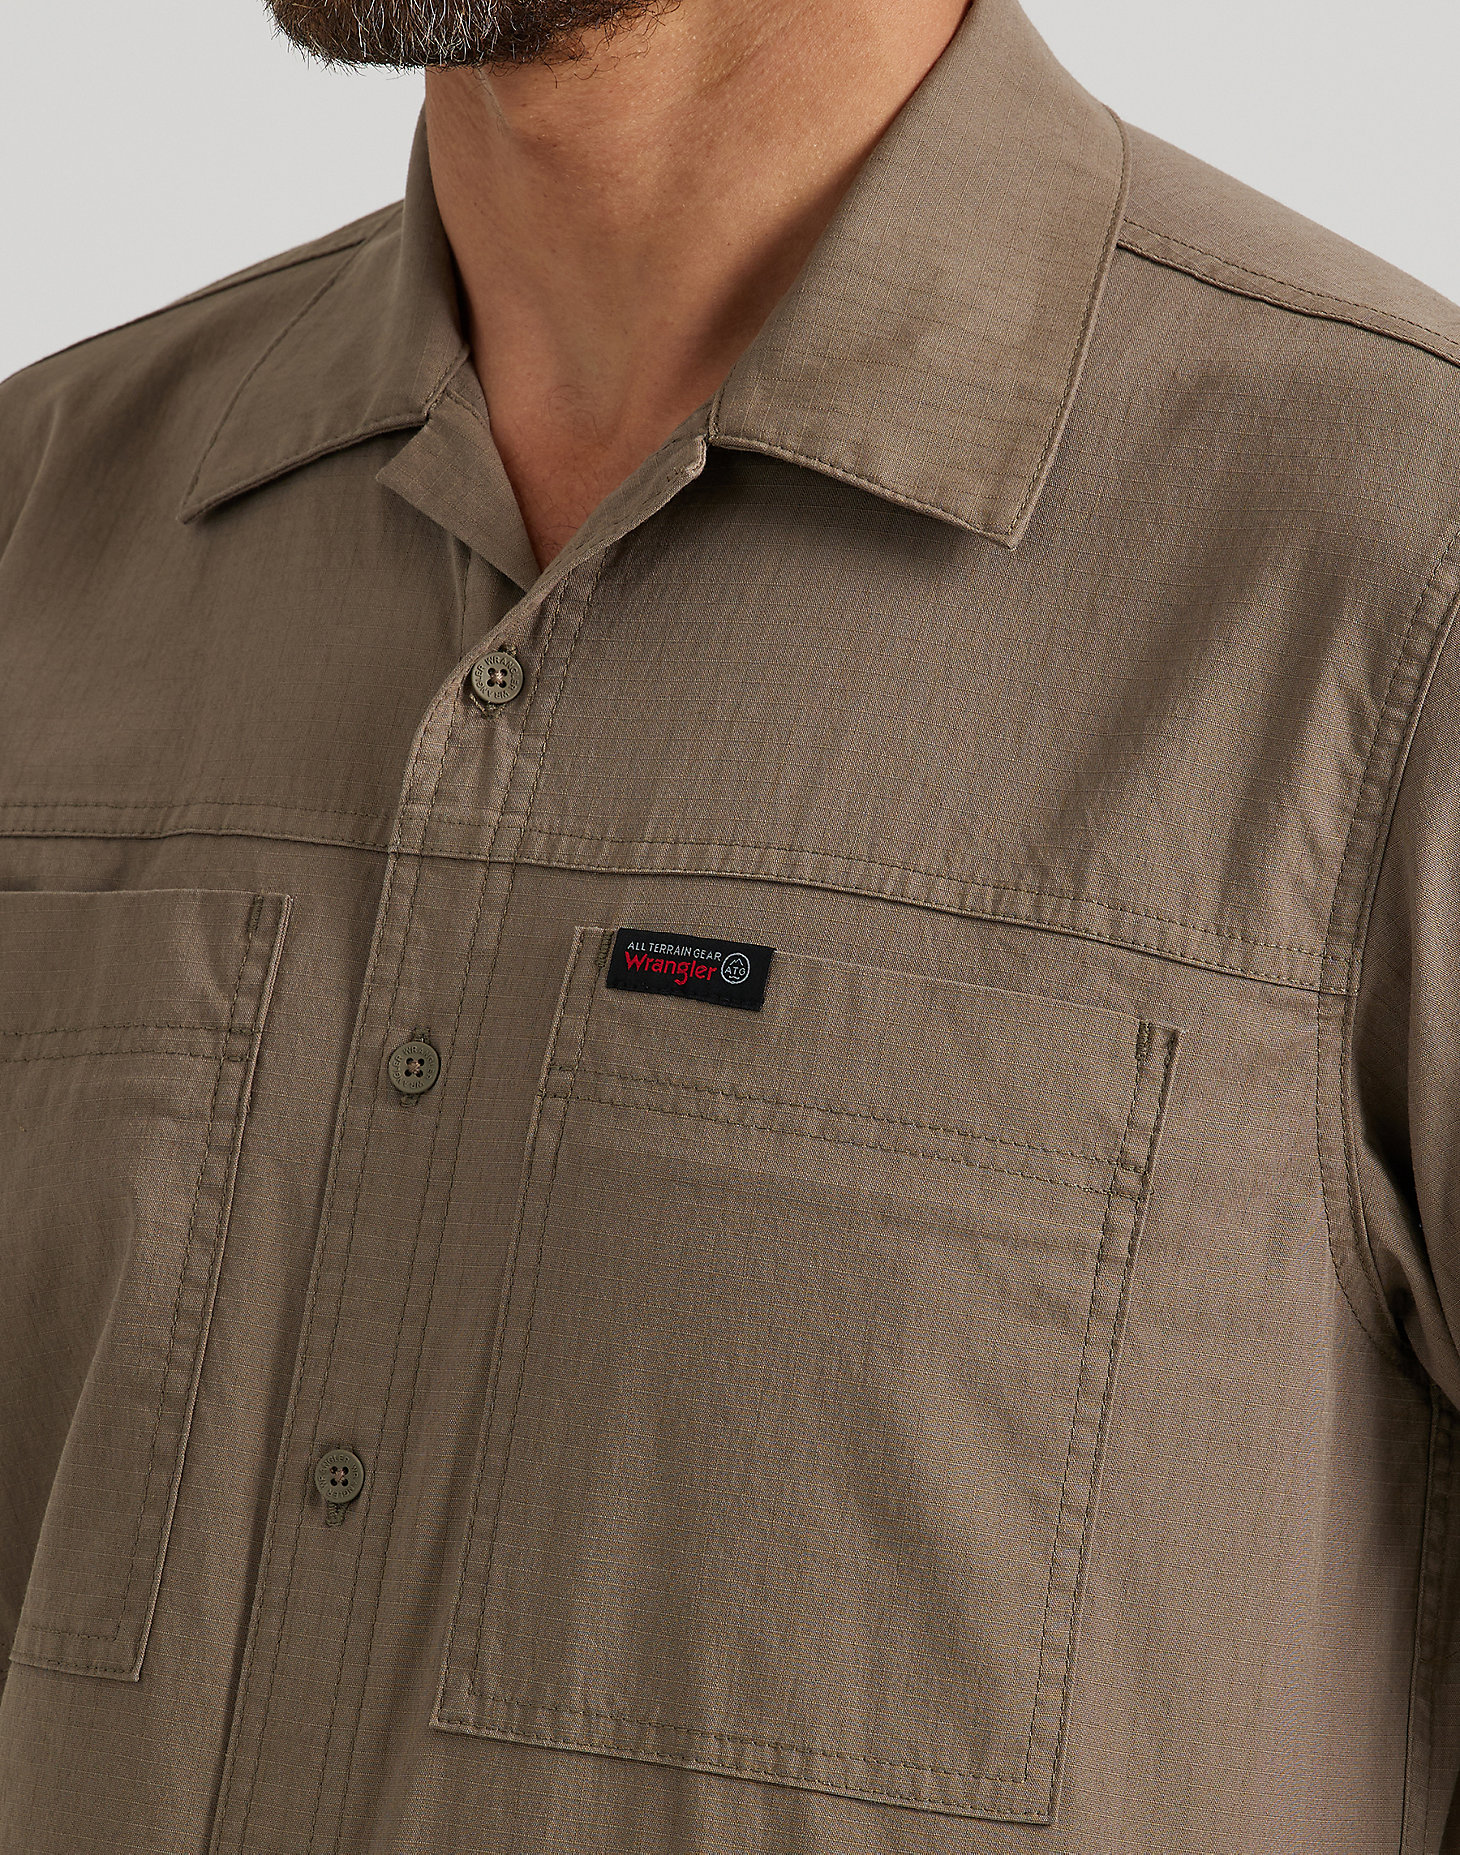 Long Sleeve Rugged Utility Shirt in Bungee Cord alternative view 2